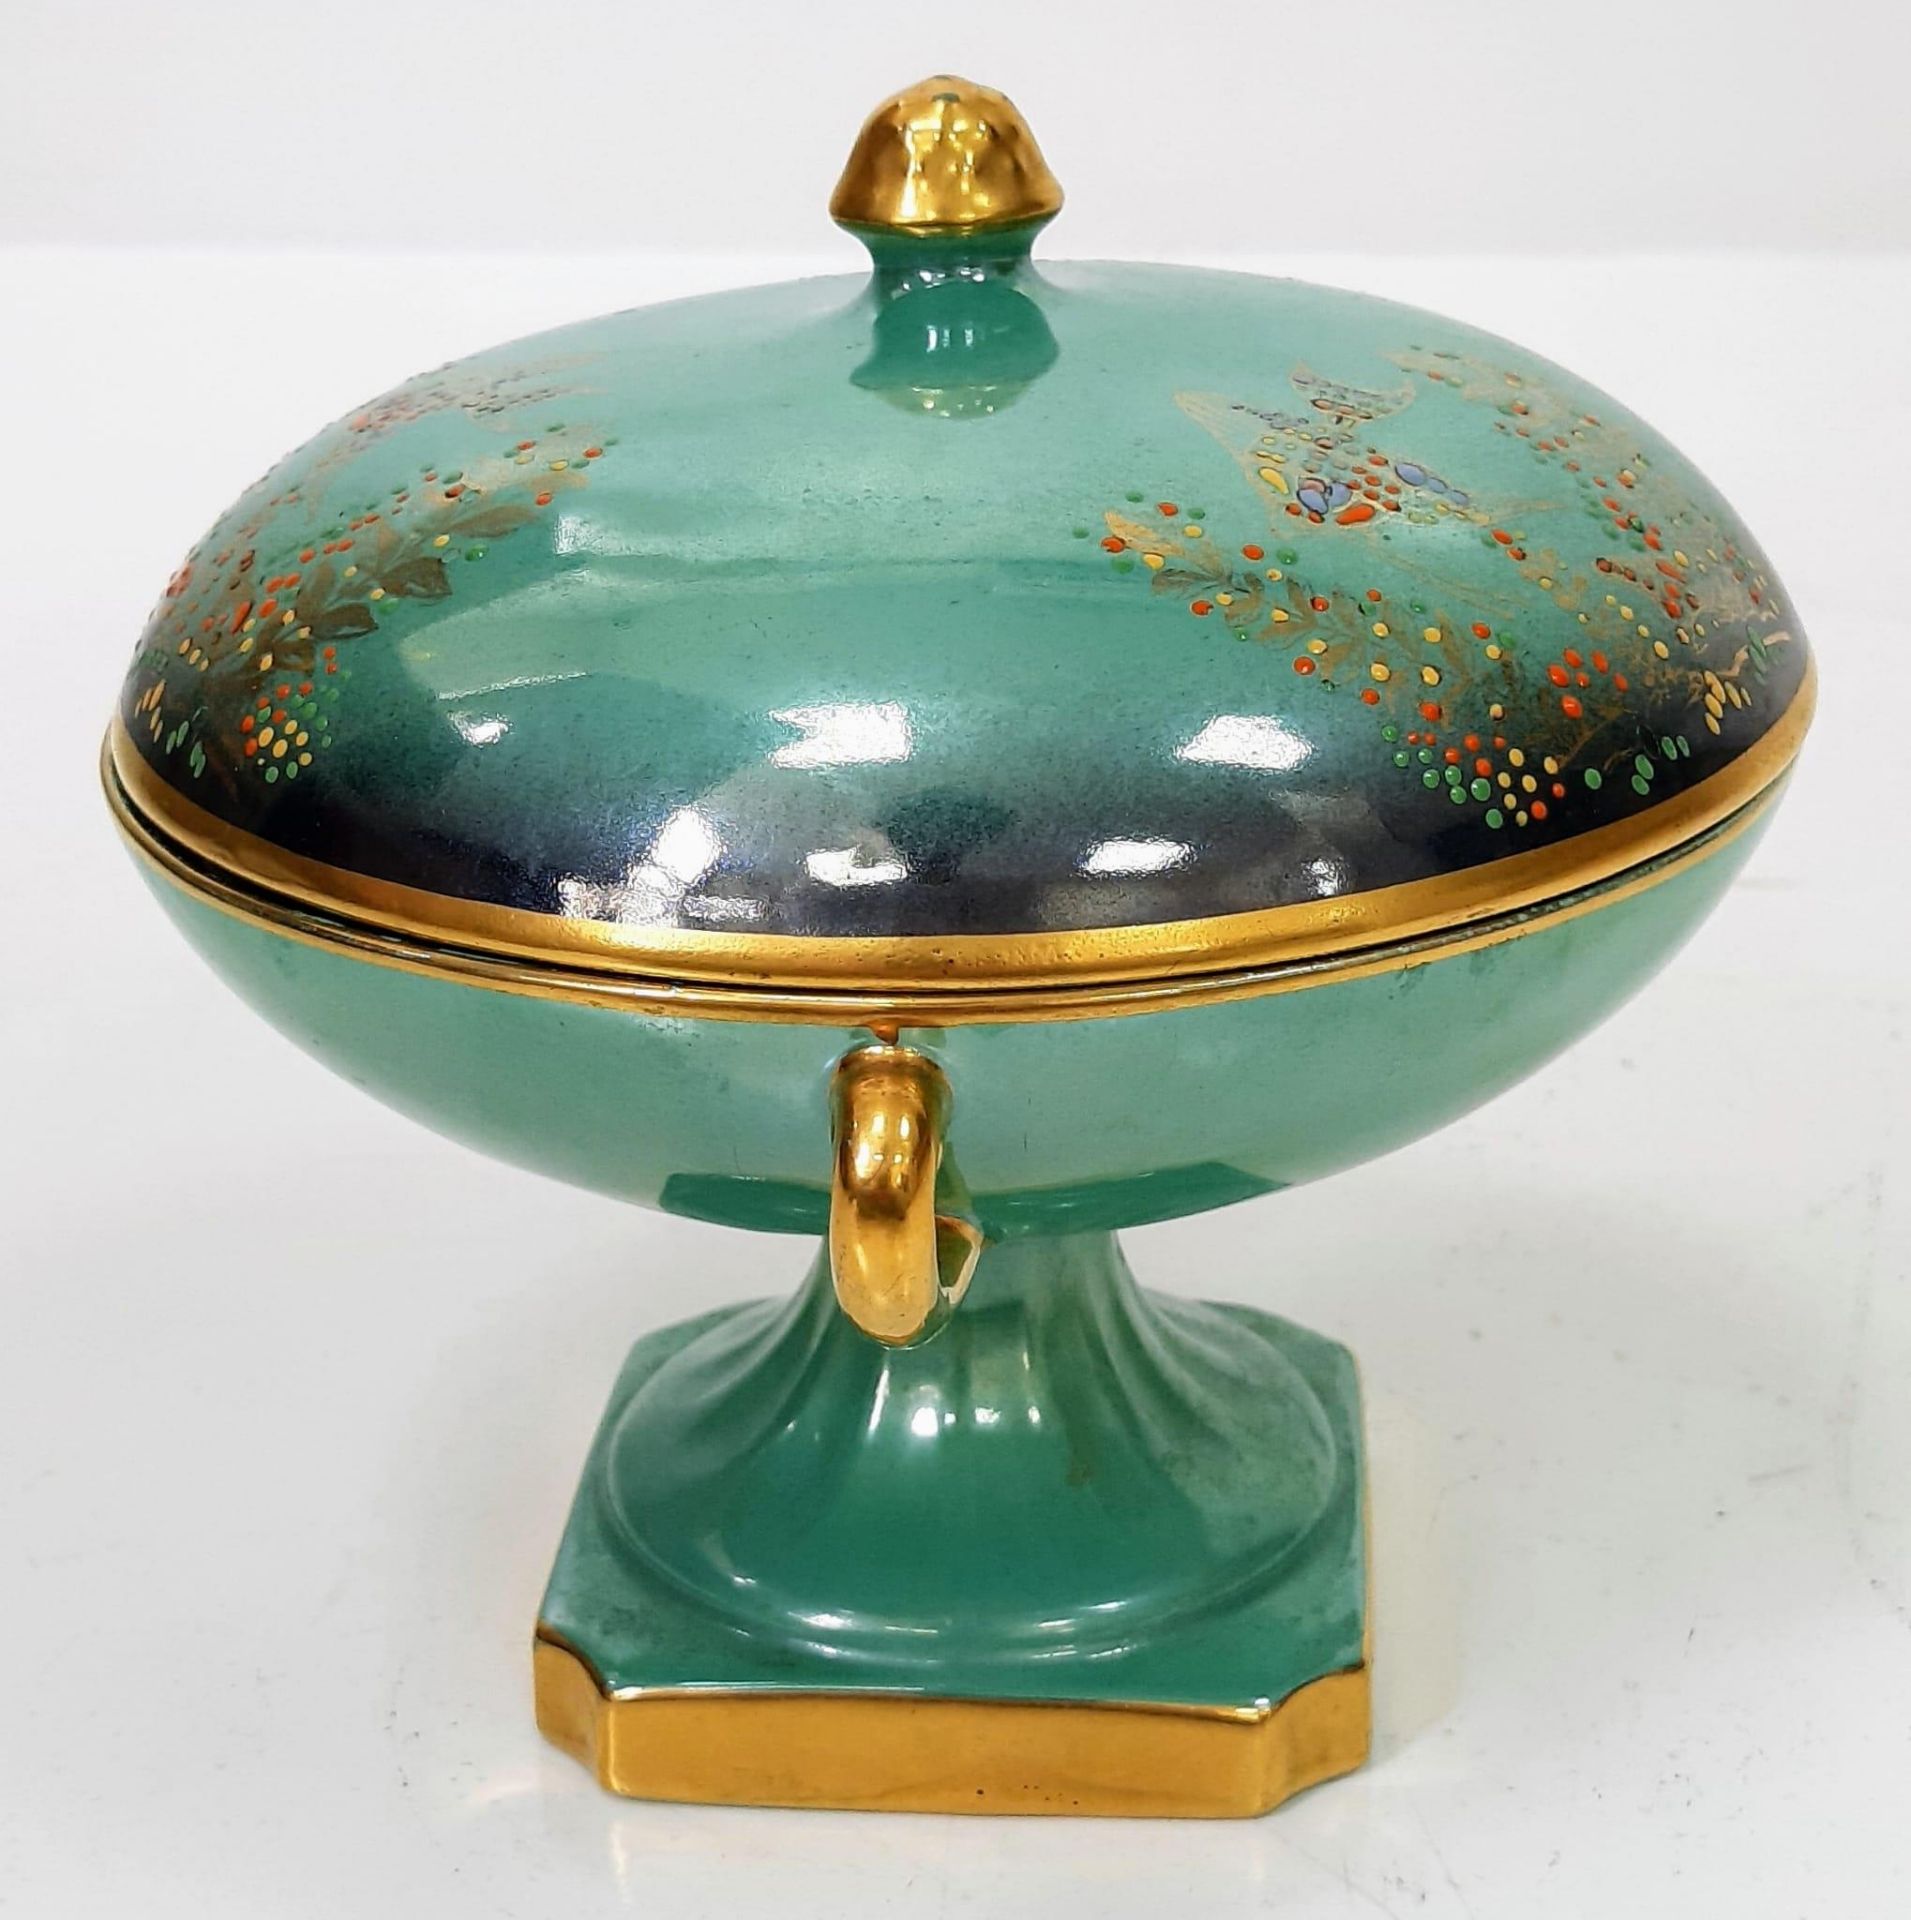 A Vintage Possibly Antique Empire of England Lidded Ceramic Vase. Green glaze with gilded touches. - Image 4 of 8